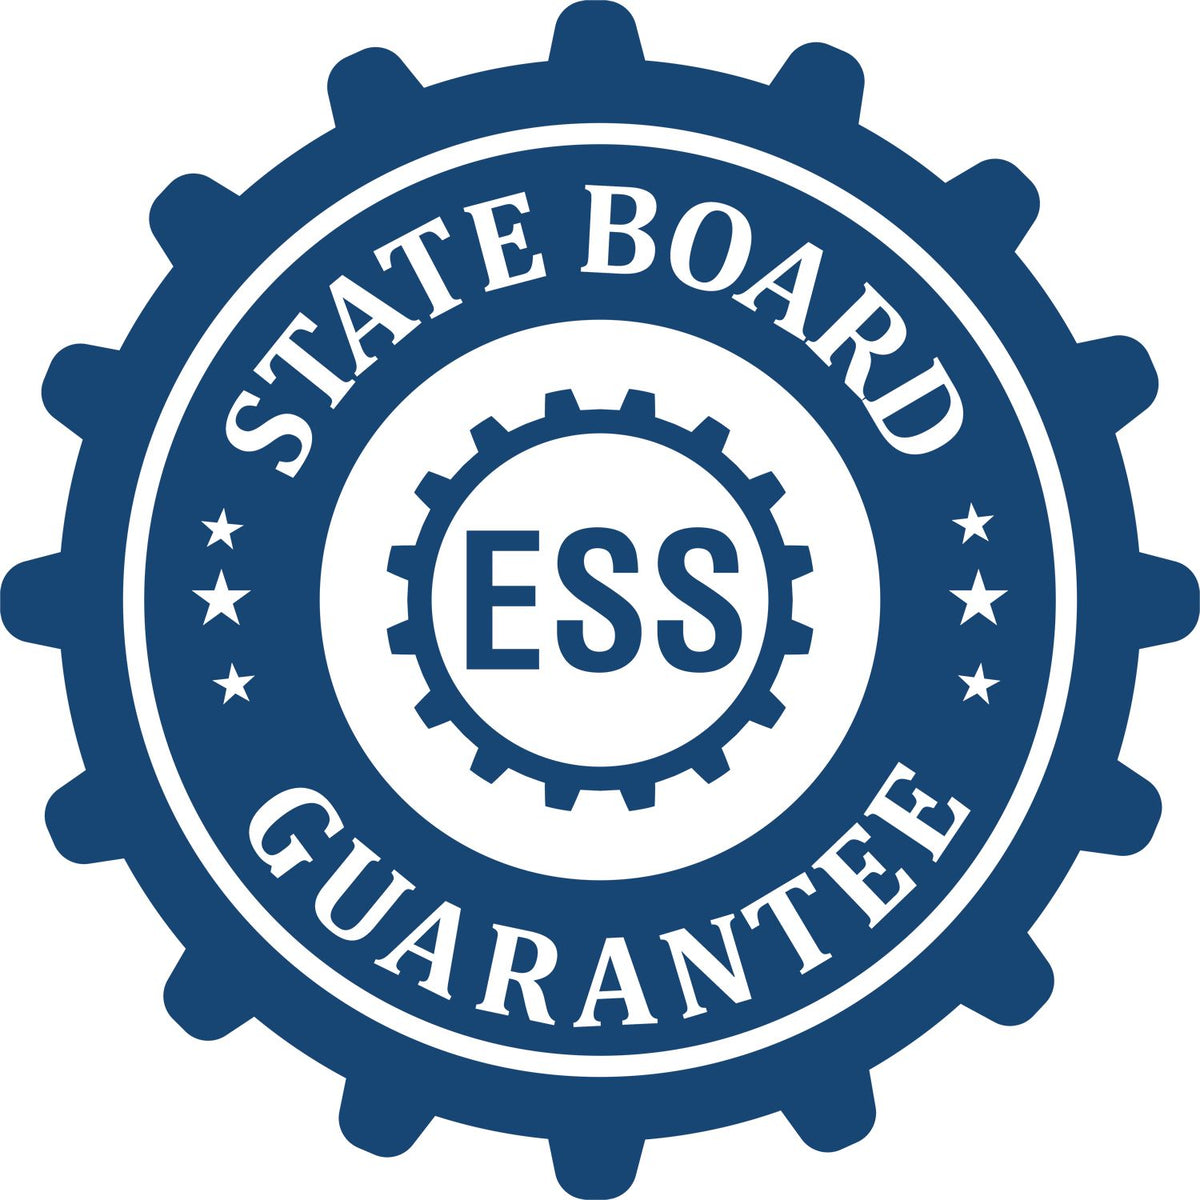 An emblem in a gear shape illustrating a state board guarantee for the Handheld Nevada Land Surveyor Seal product.